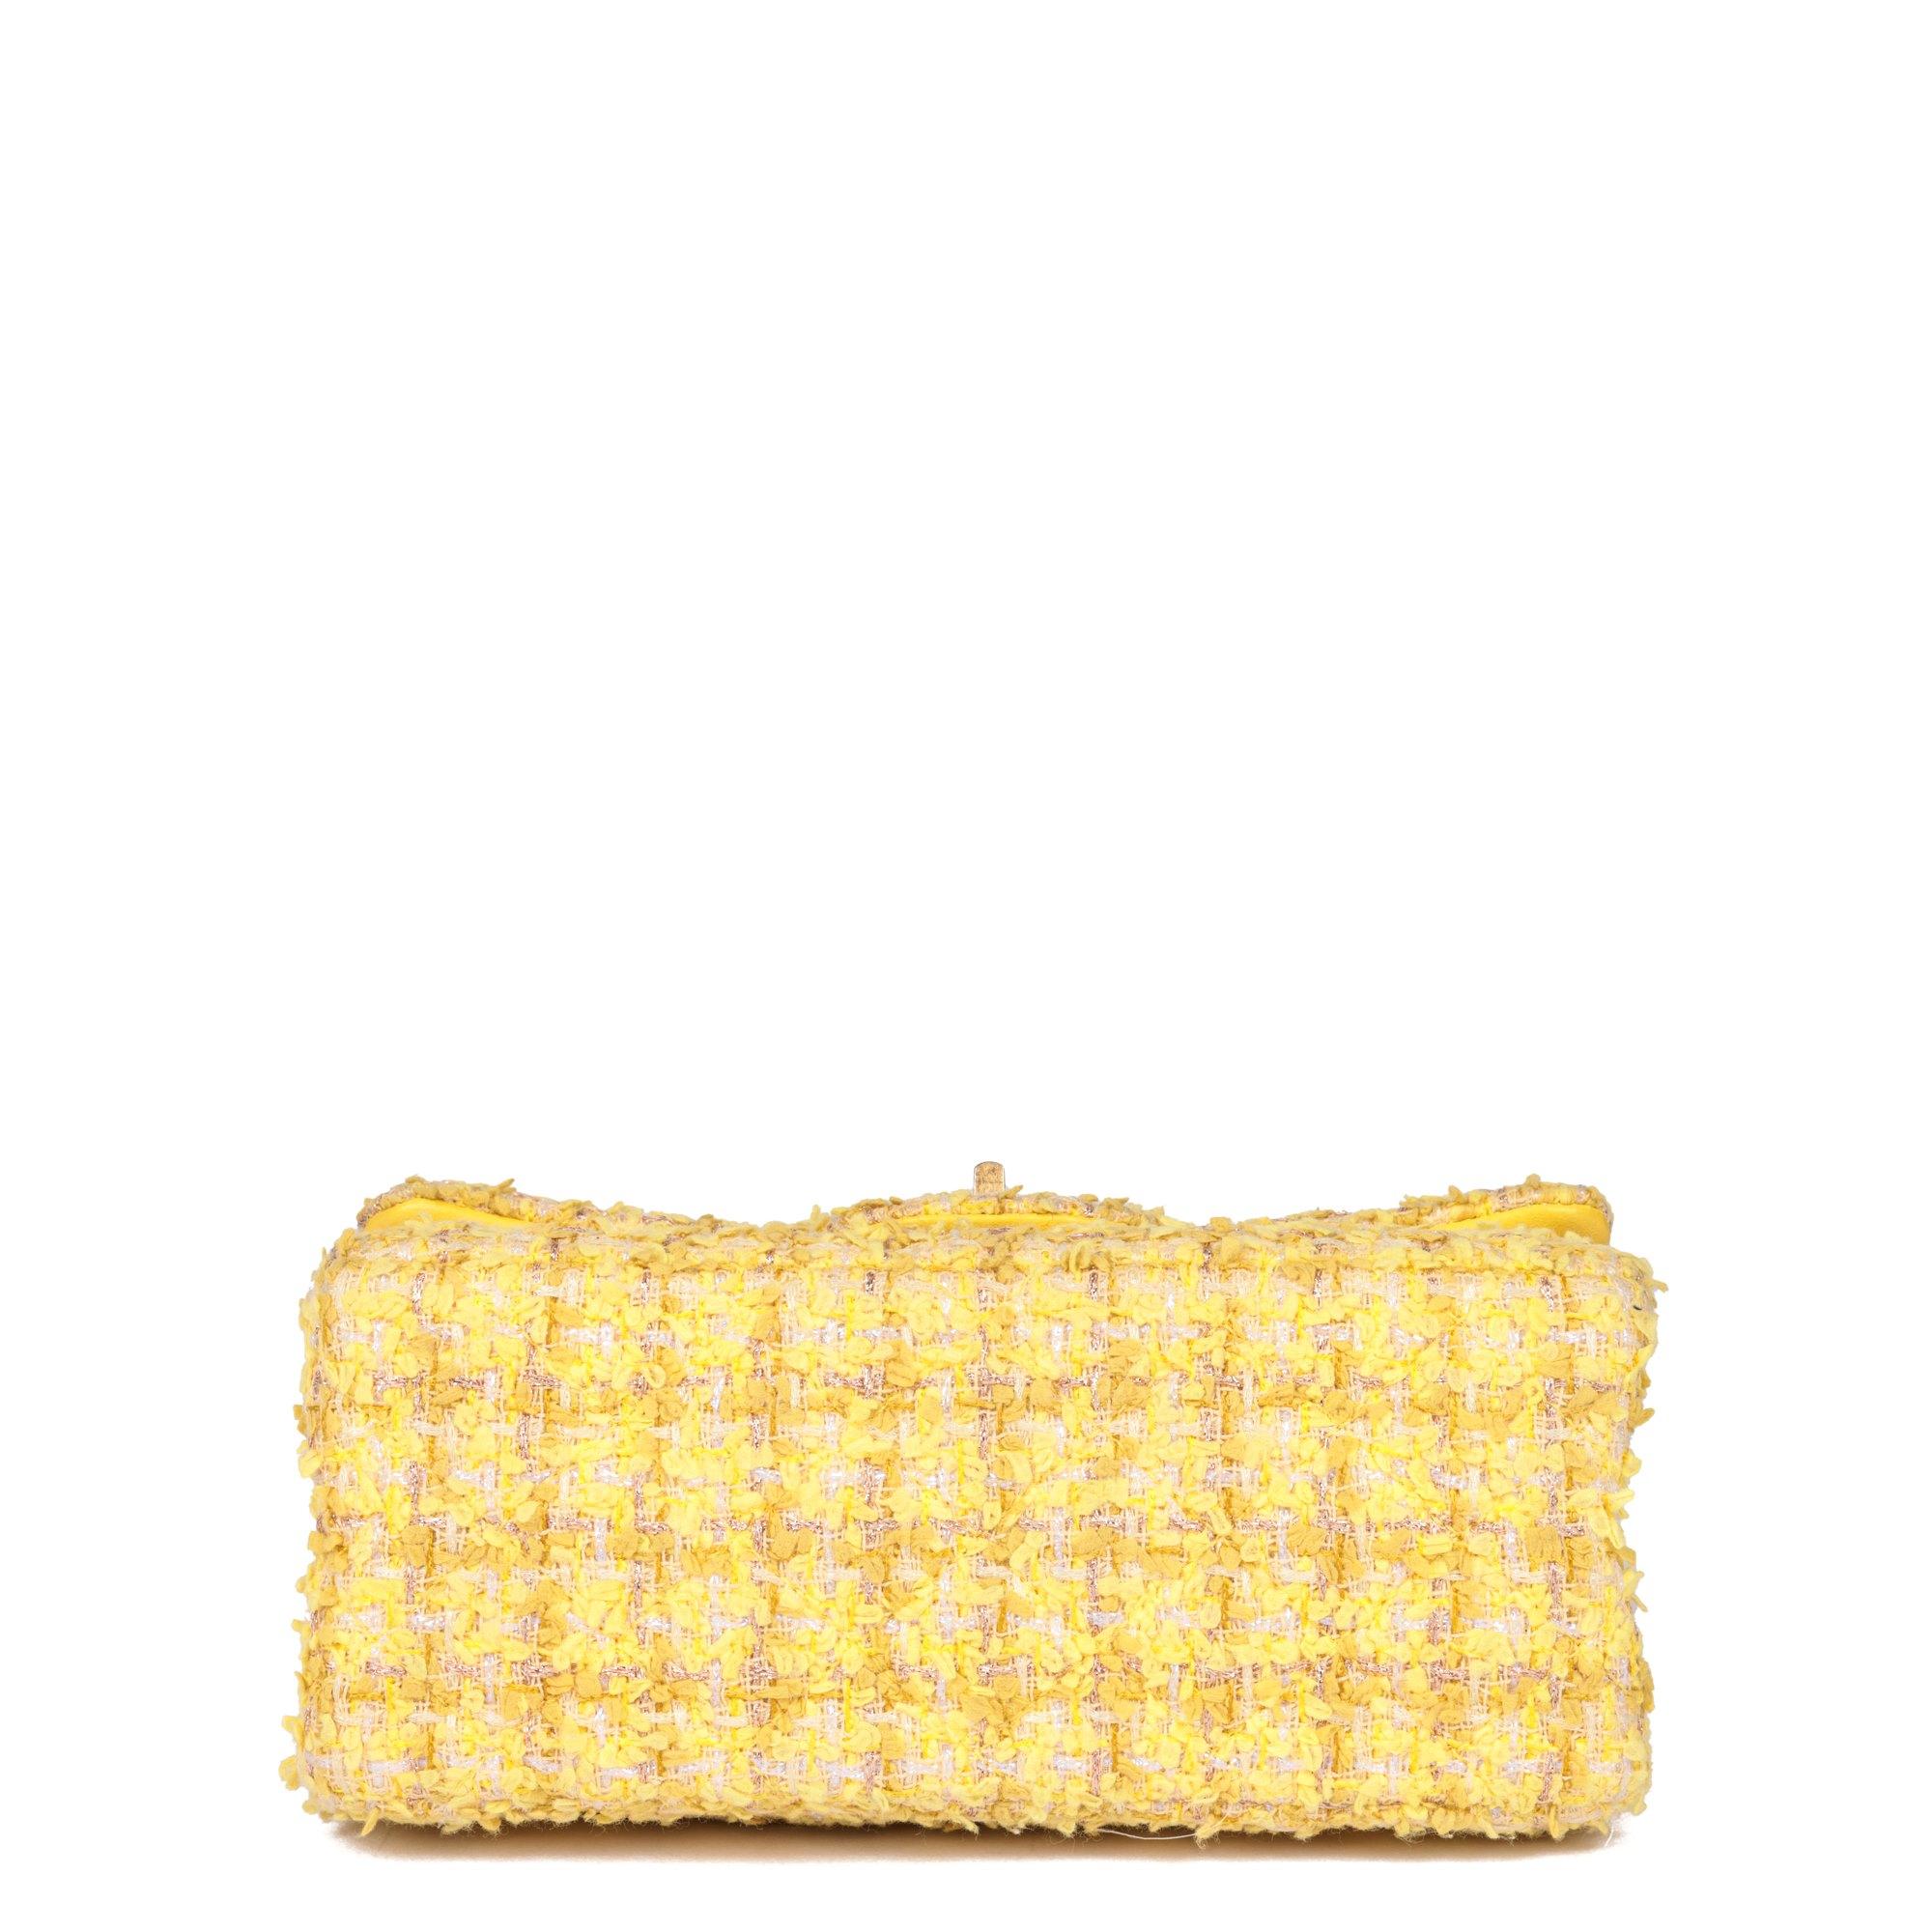 CHANEL Canary Yellow Tweed Fabric 224 2.55 Reissue Double Flap Bag For Sale 2